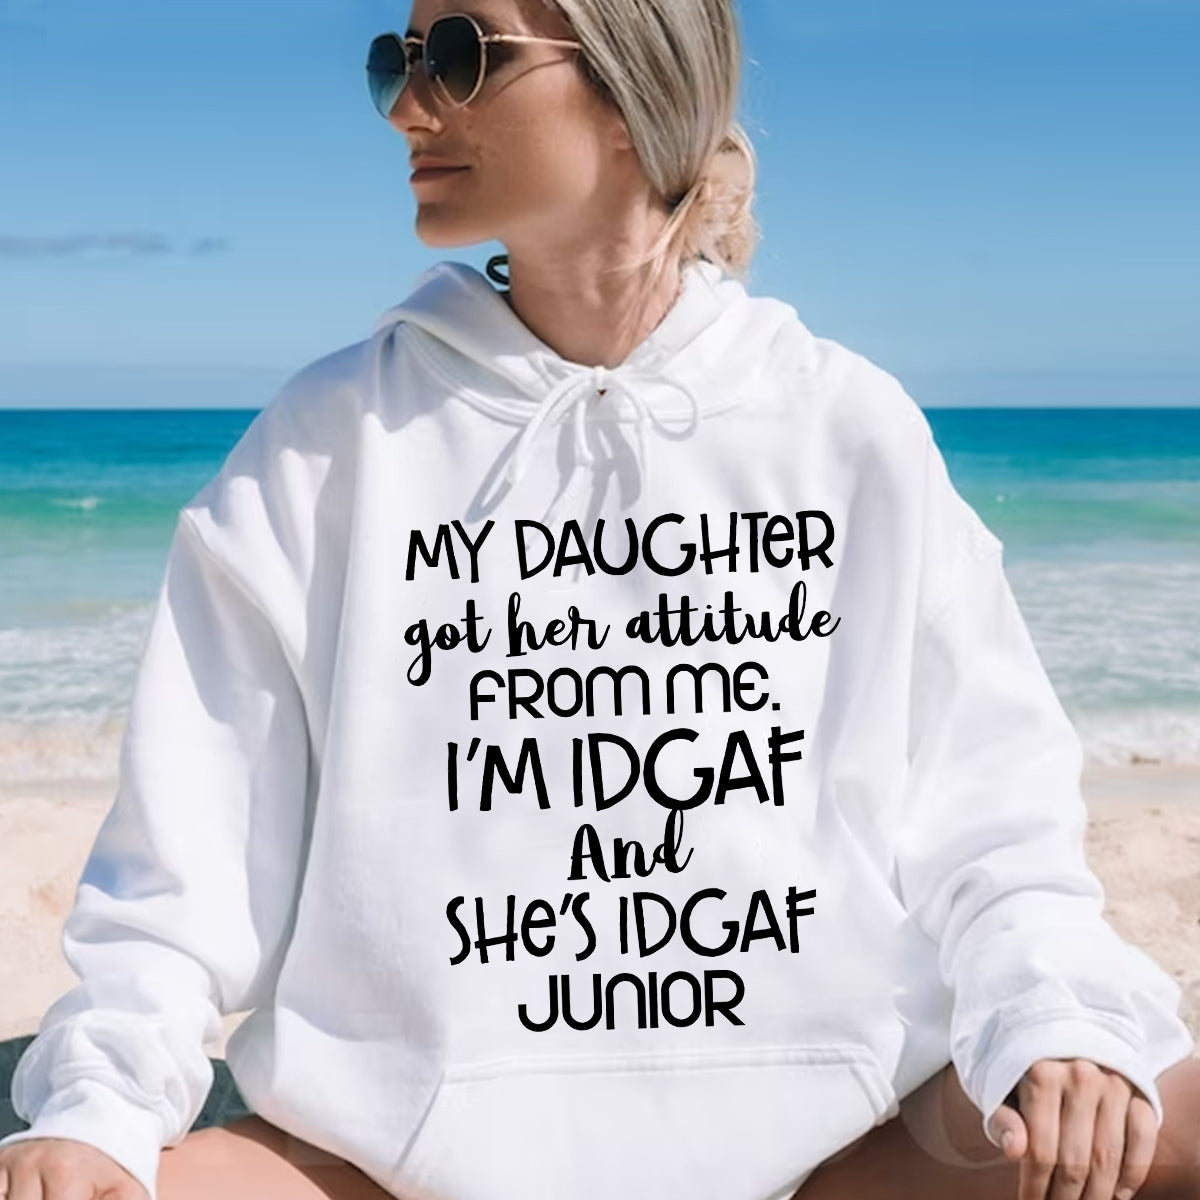 Teesdily | Mom Funny Mothers Day Shirt, I'm Idgaf And She's Idgaf Junior Quote Shirt, Gift From Daughter For Mommy Unisex Tshirt Hoodie Sweatshirt Size S-5Xl / Mug 11-15Oz